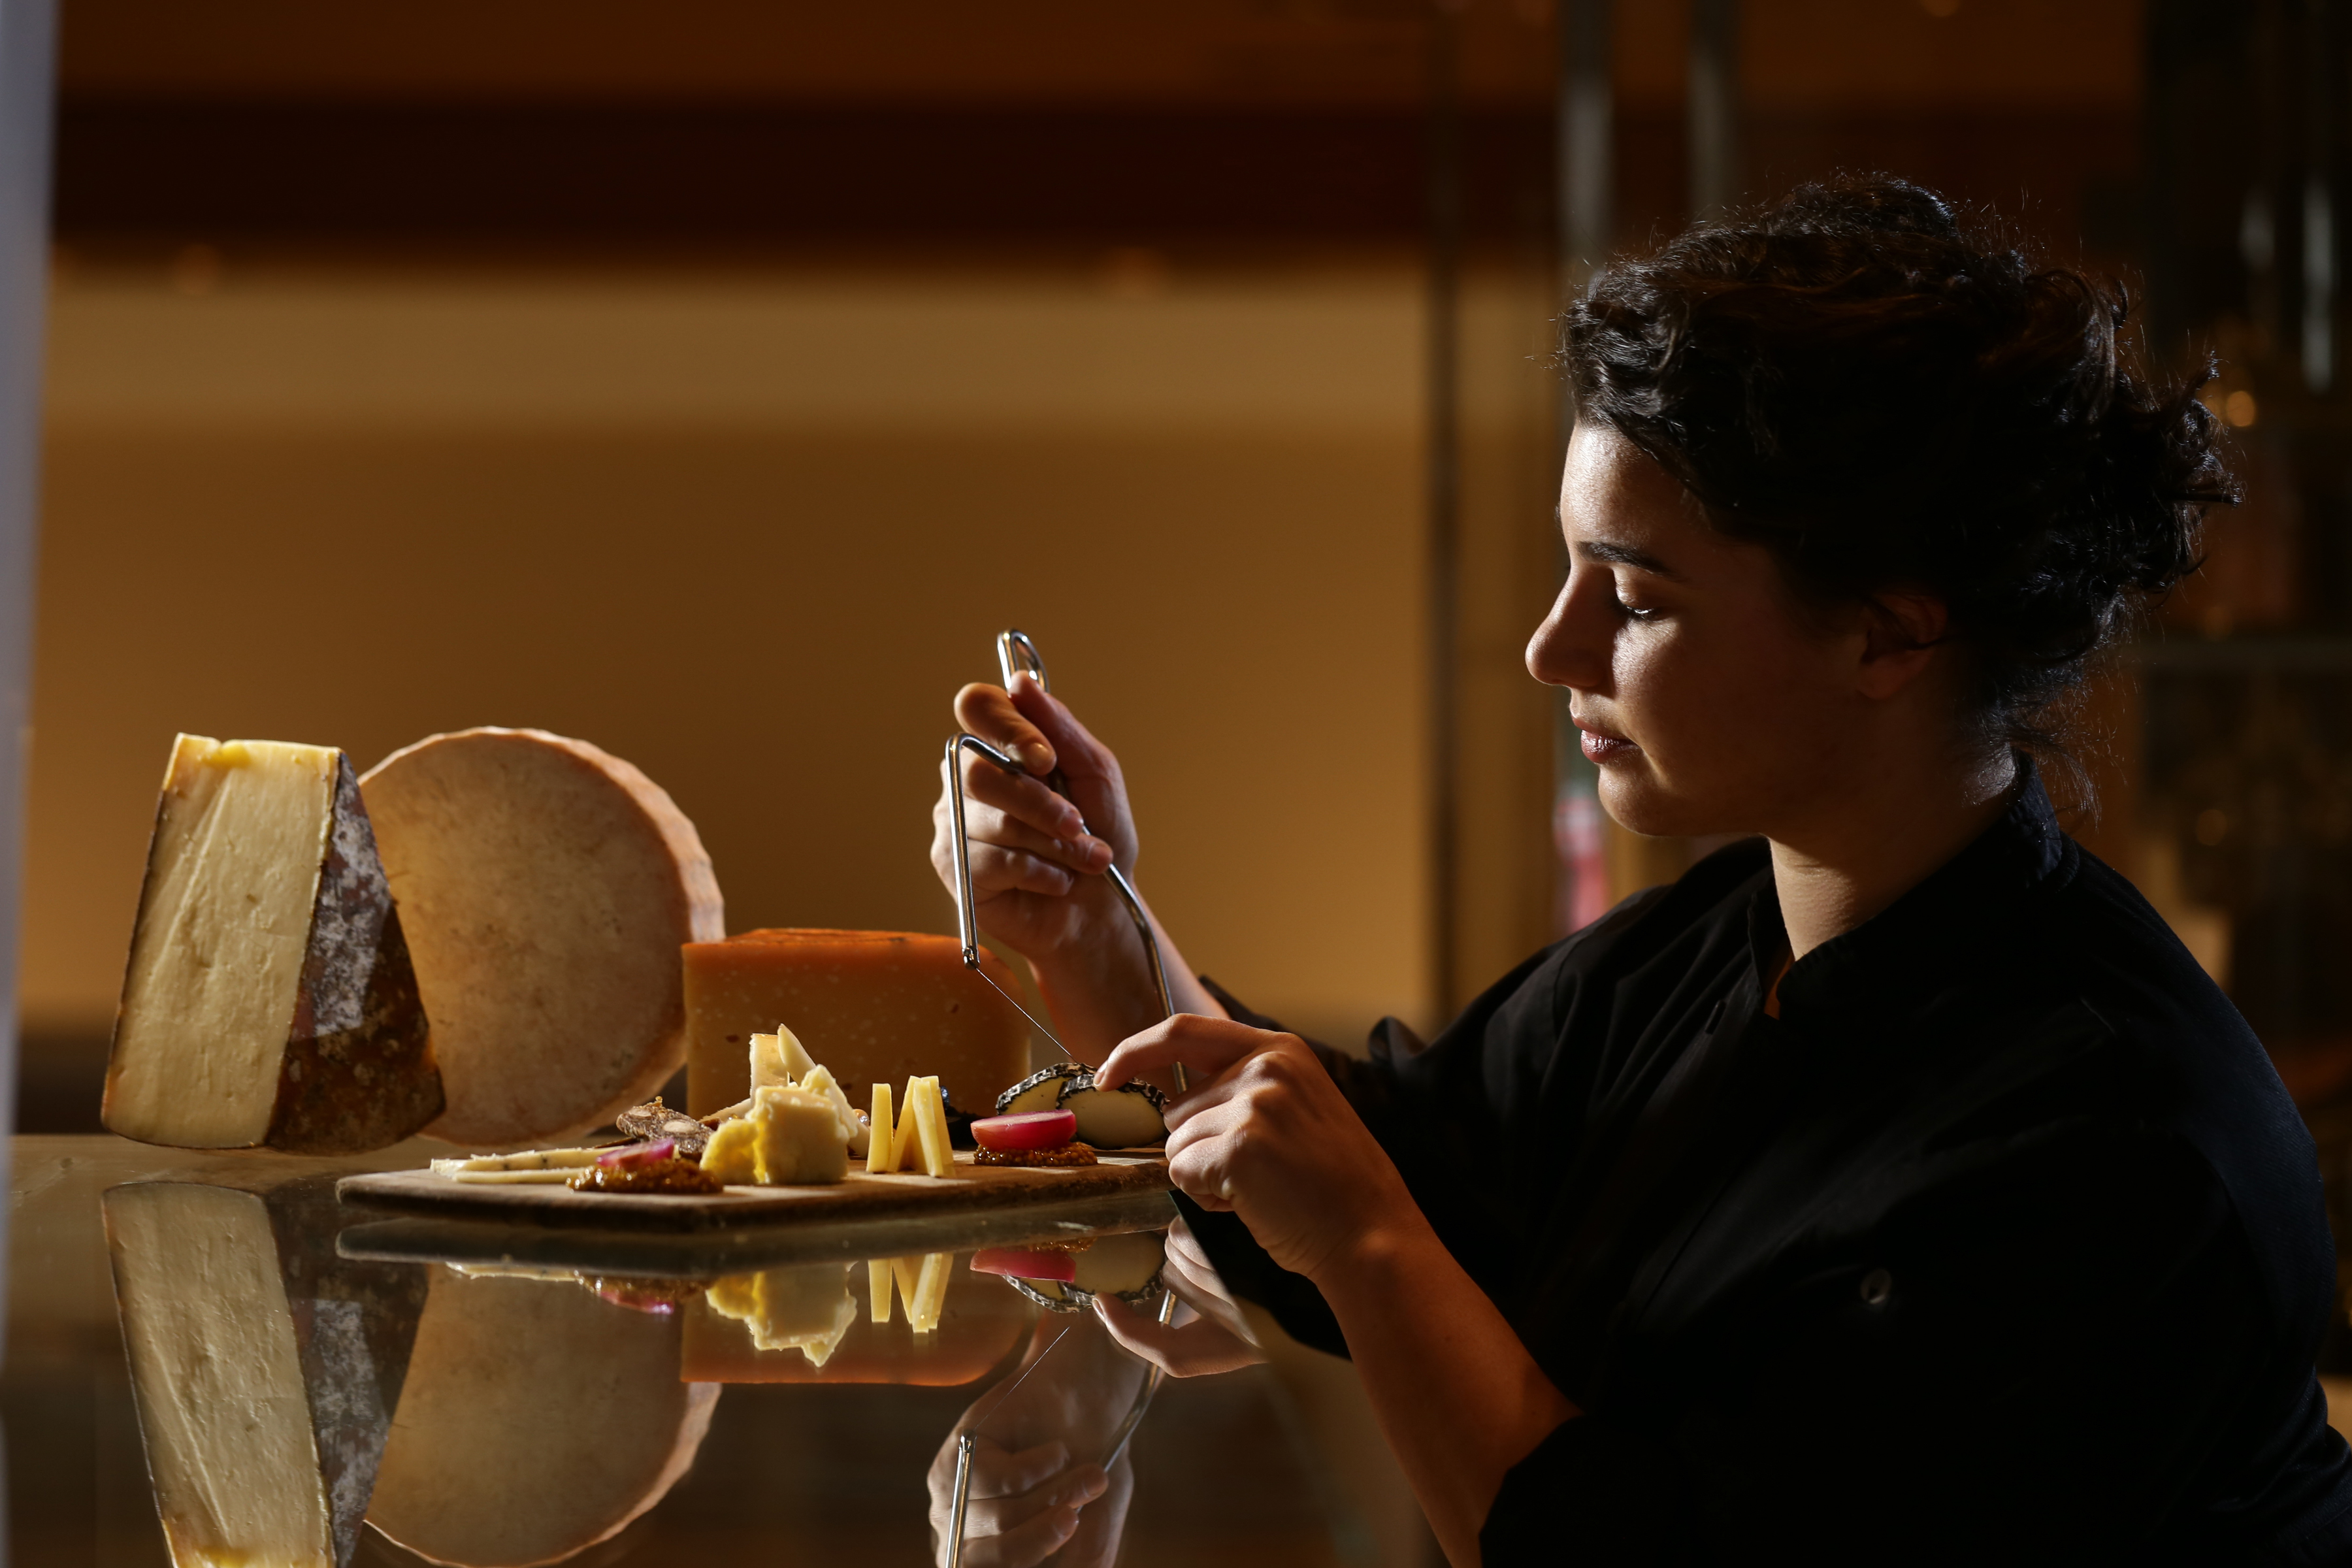 Cheese specialist Sophie Slesinger will talk about cheese and beer pairings at the next Park Hyatt Masters of Food & Wine class. (Photo: Len DePas Photography)